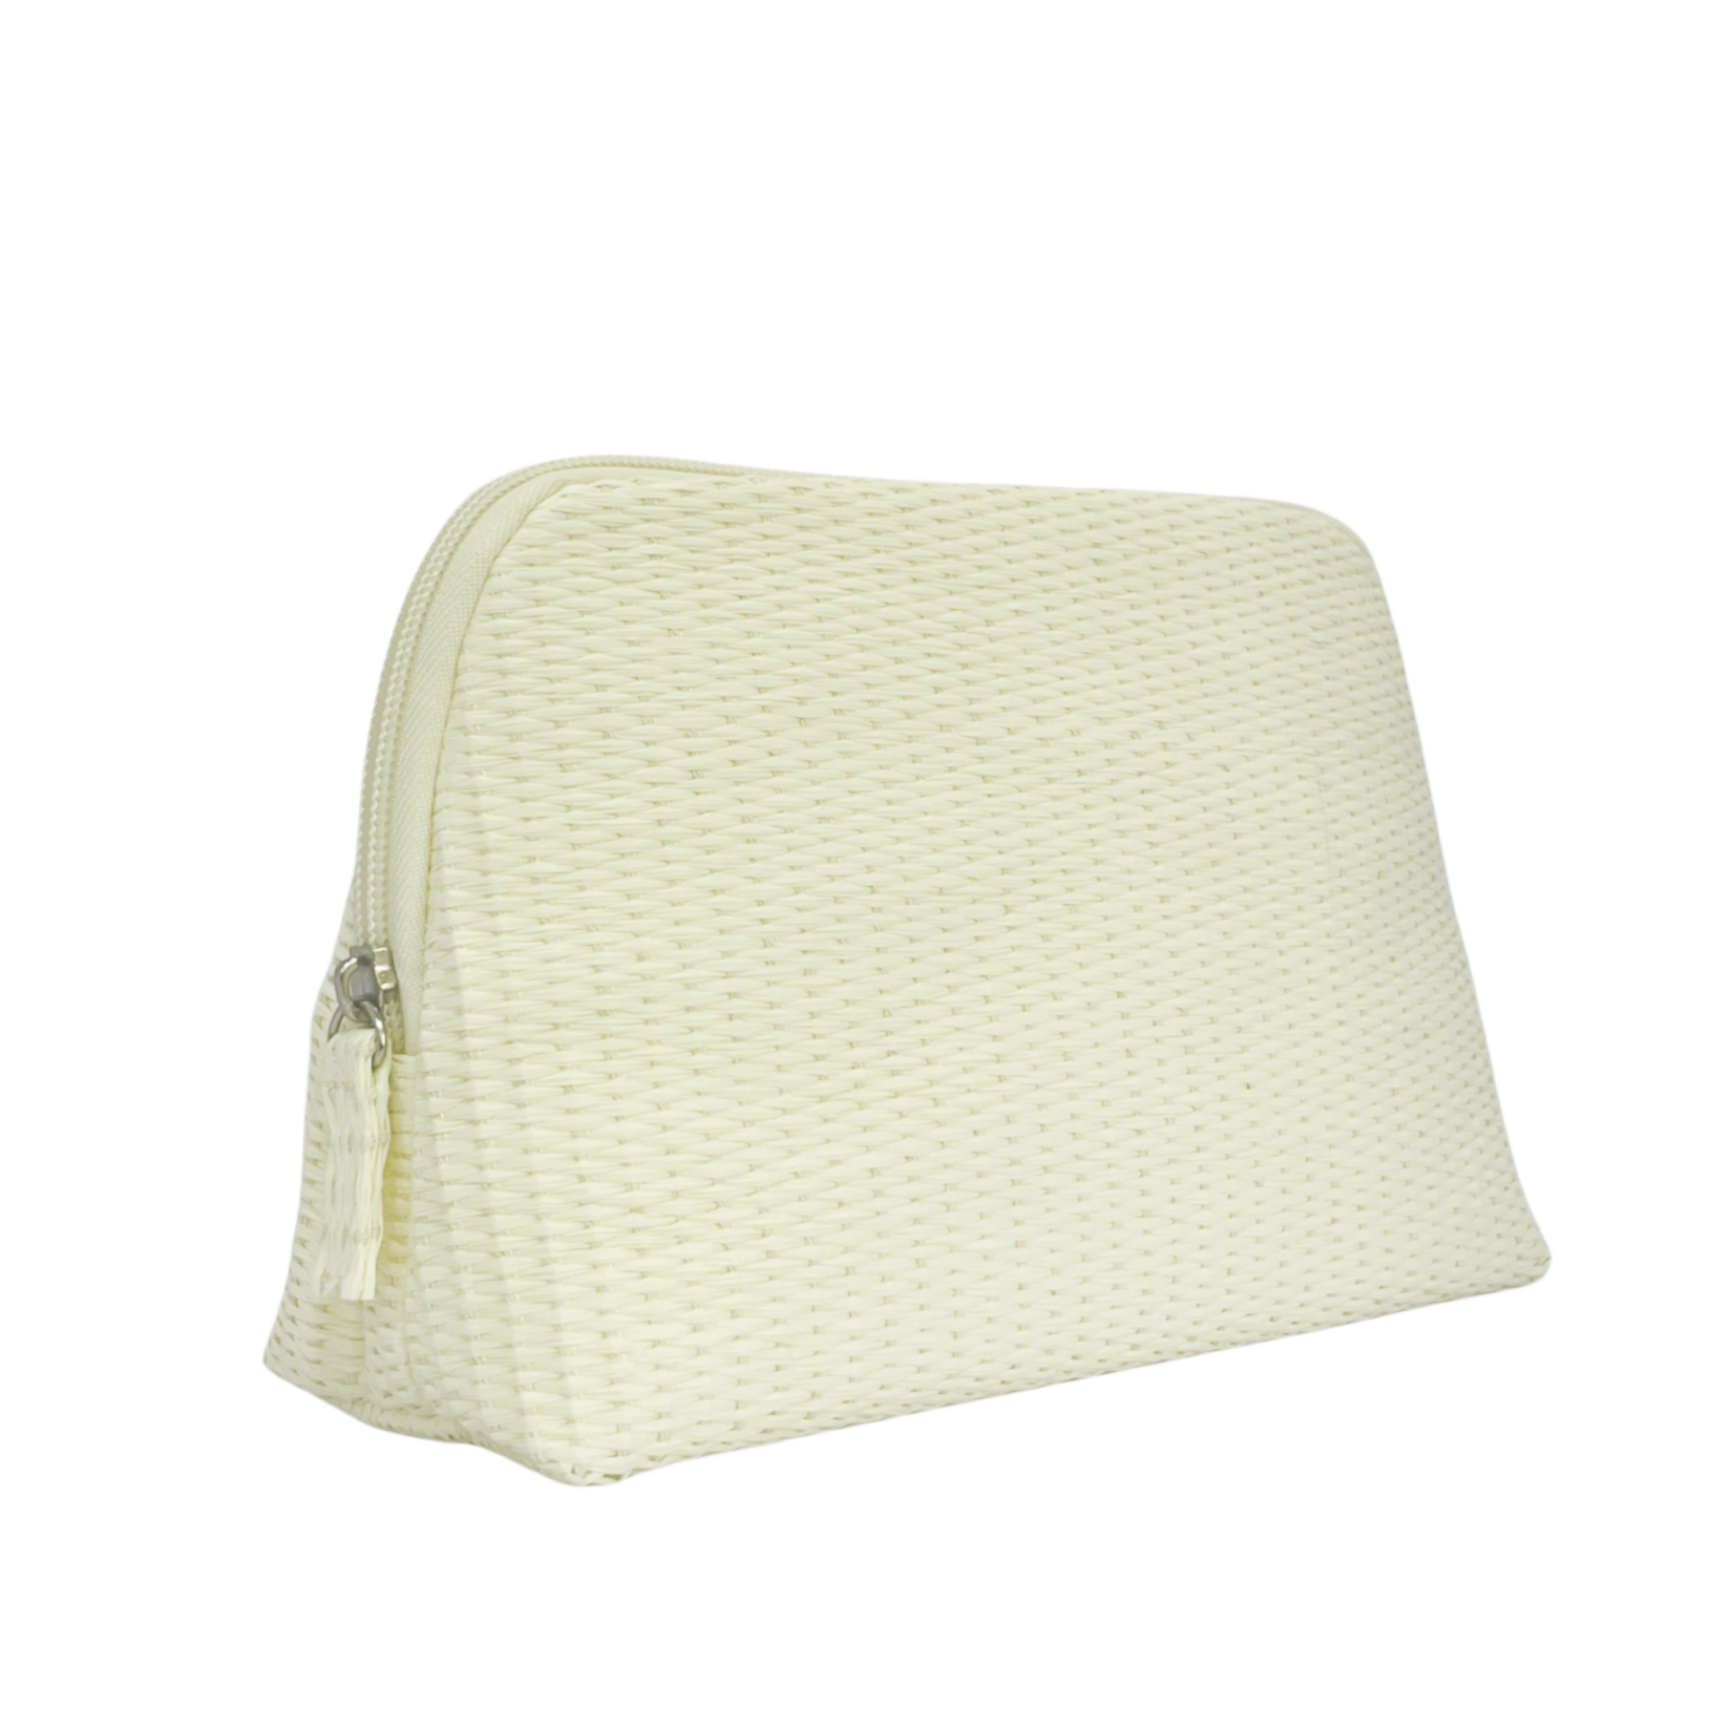 New Promotional Gifts Eco-friendly White Paper Straw Cosmetic Pouch Makeup Bag